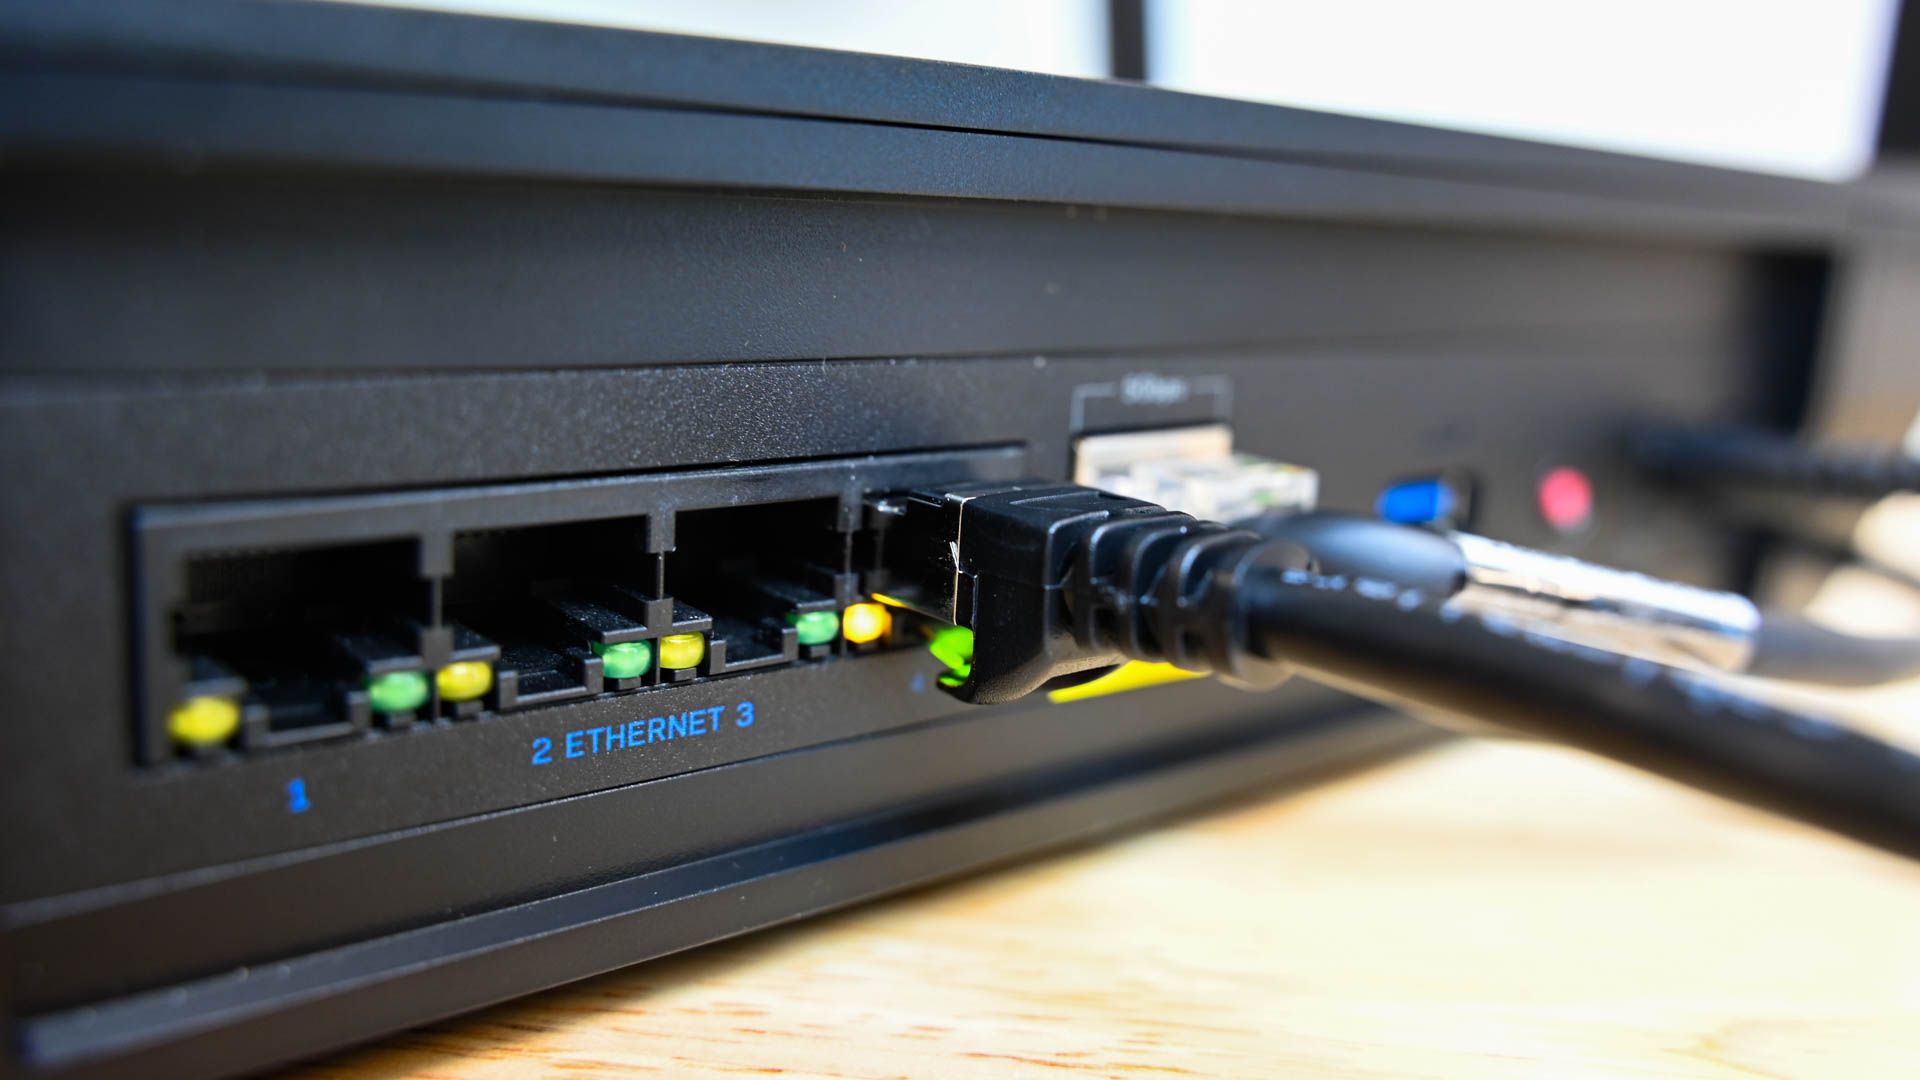 Ethernet cable plugged into an ethernet port on a router.